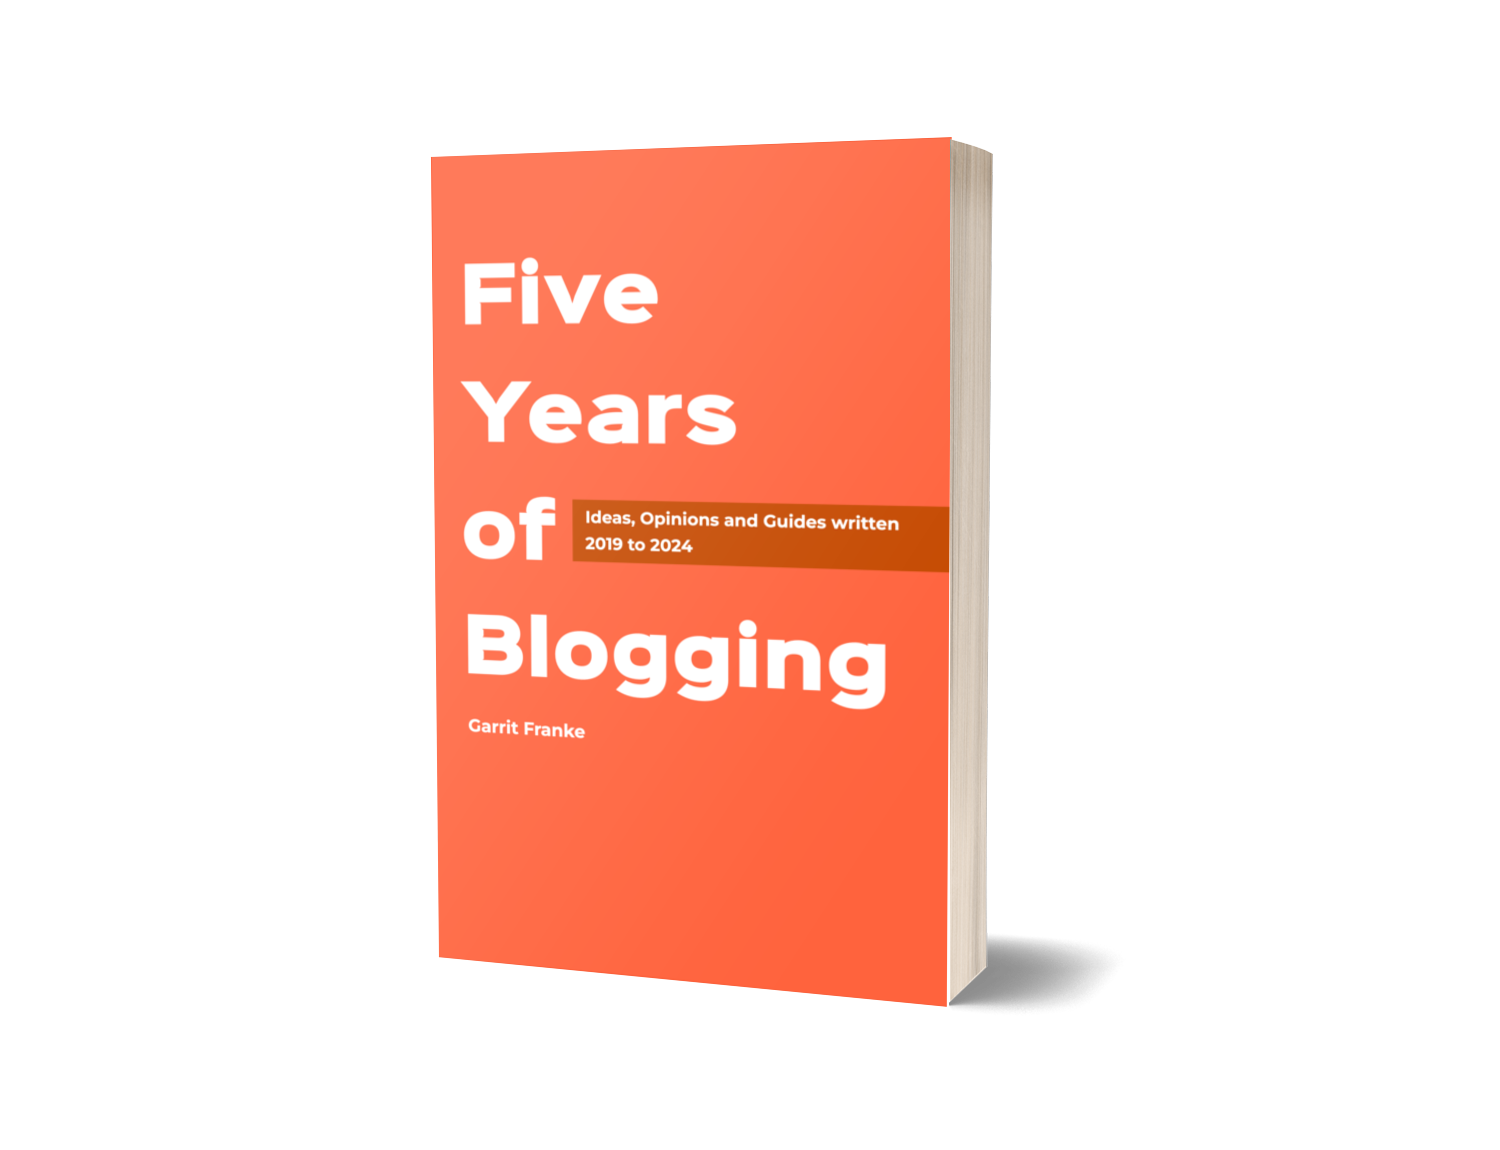 The cover of Five Years of Blogging